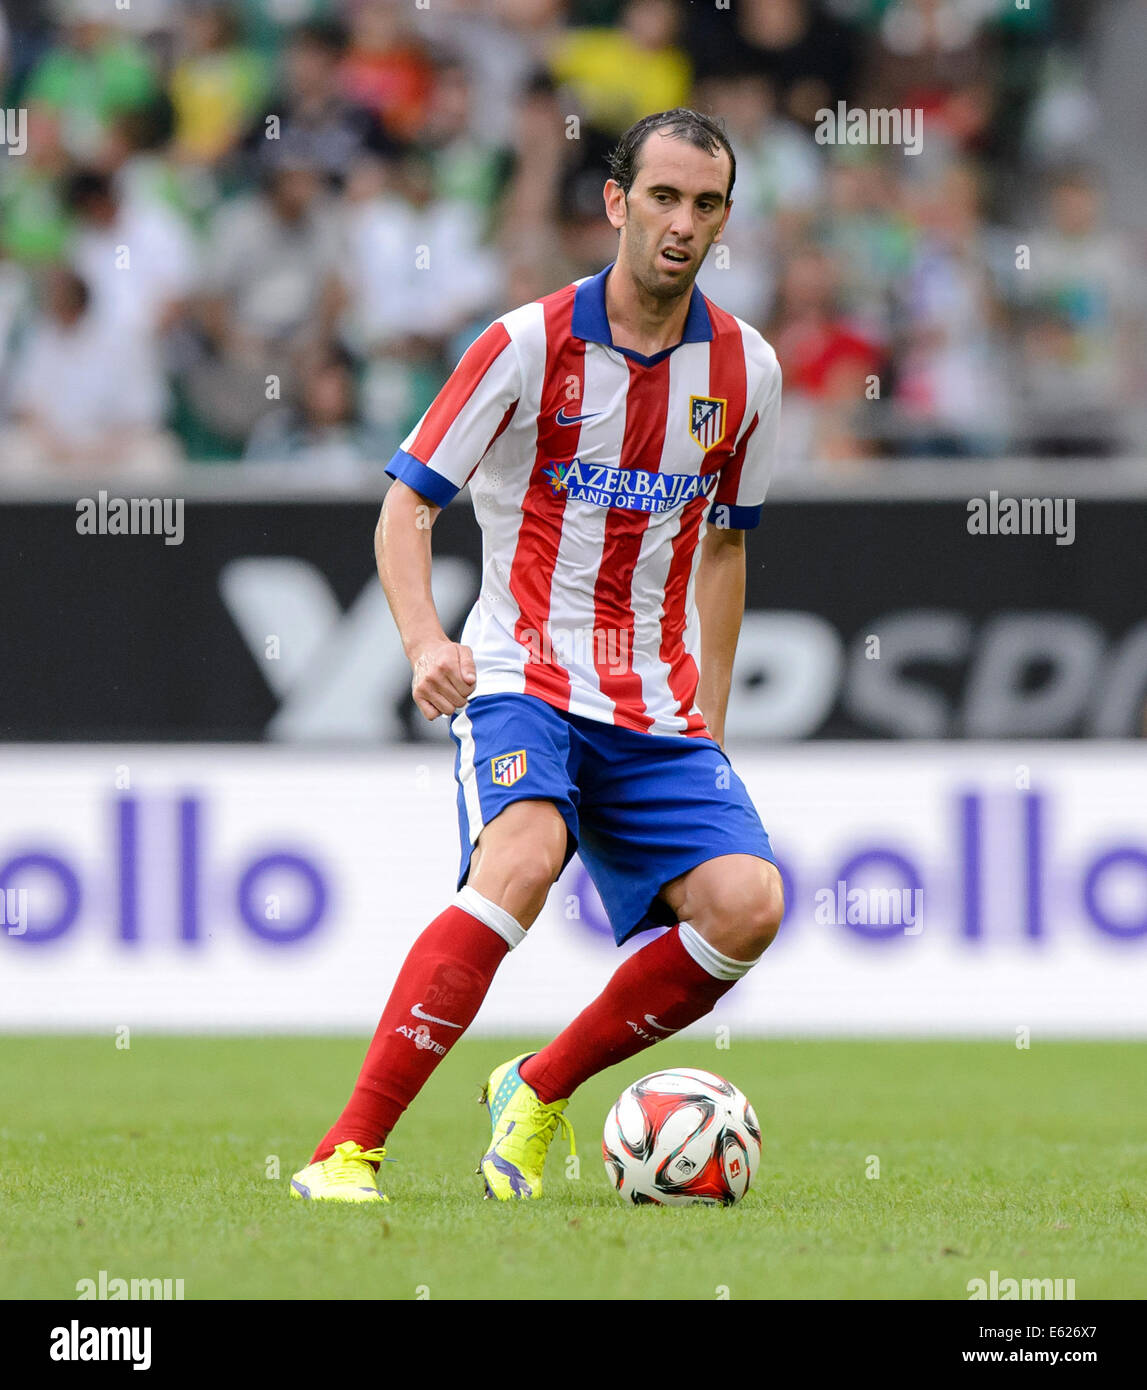 Wolfsburg, Germany. 10th Aug, 2014. Madrid's Diego Godin in action during the soccer test match between VfL Wolfsburg and Atletico Madrid at Volkswagen Arena in Wolfsburg, Germany, 10 August 2014. Photo: Thomas Eisenhuth/dpa/Alamy Live News Stock Photo